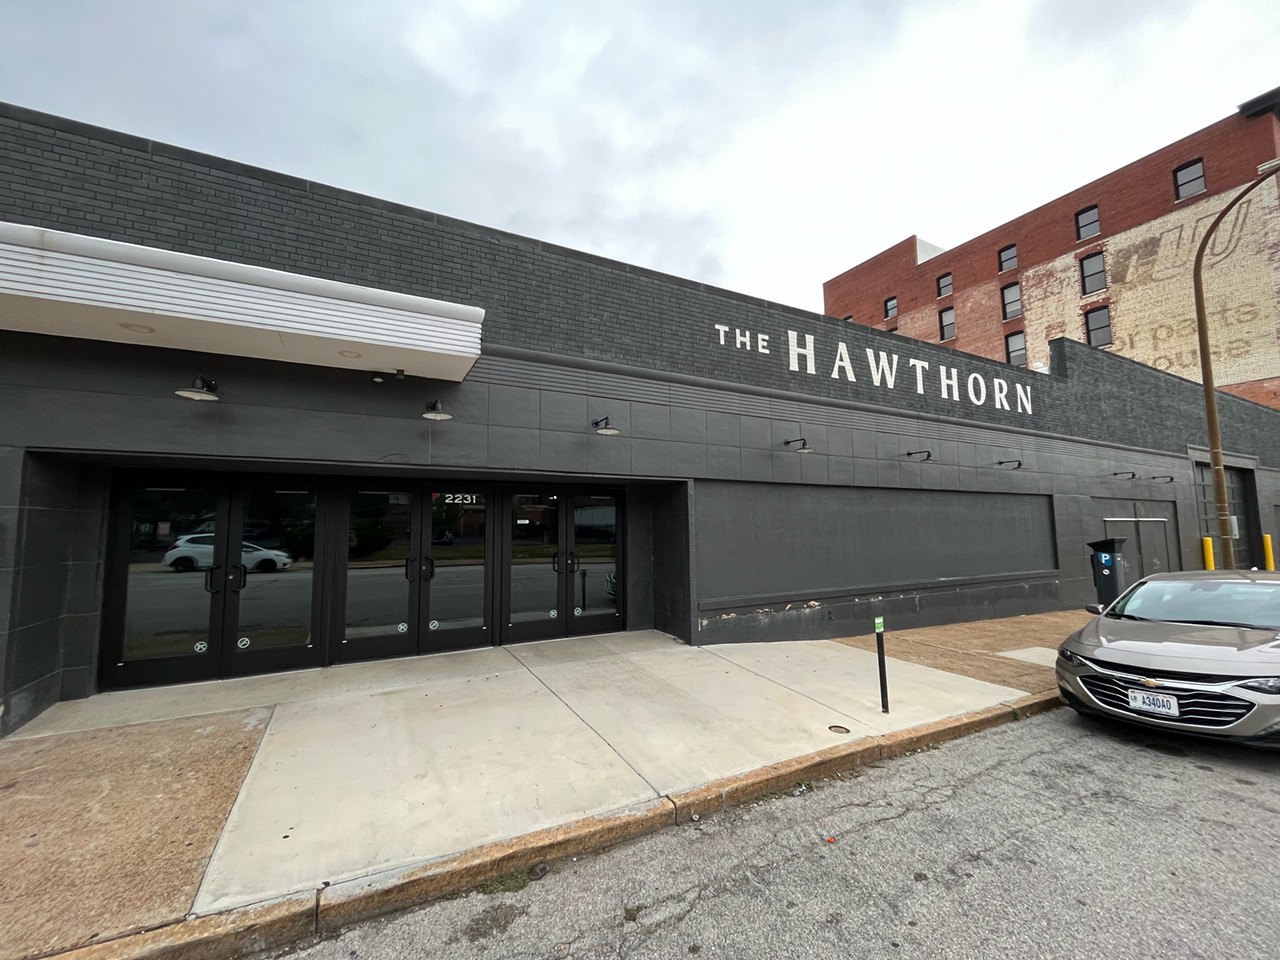 THE HAWTHORN
(2231 Washington Avenue, thehawthornstl.com)
VIBE: Wide open venue and event space booking some of the hottest shows in town
TIP: Keep an eye on their calendar because they're always adding new stuff and you'll miss it if you're not paying attention.